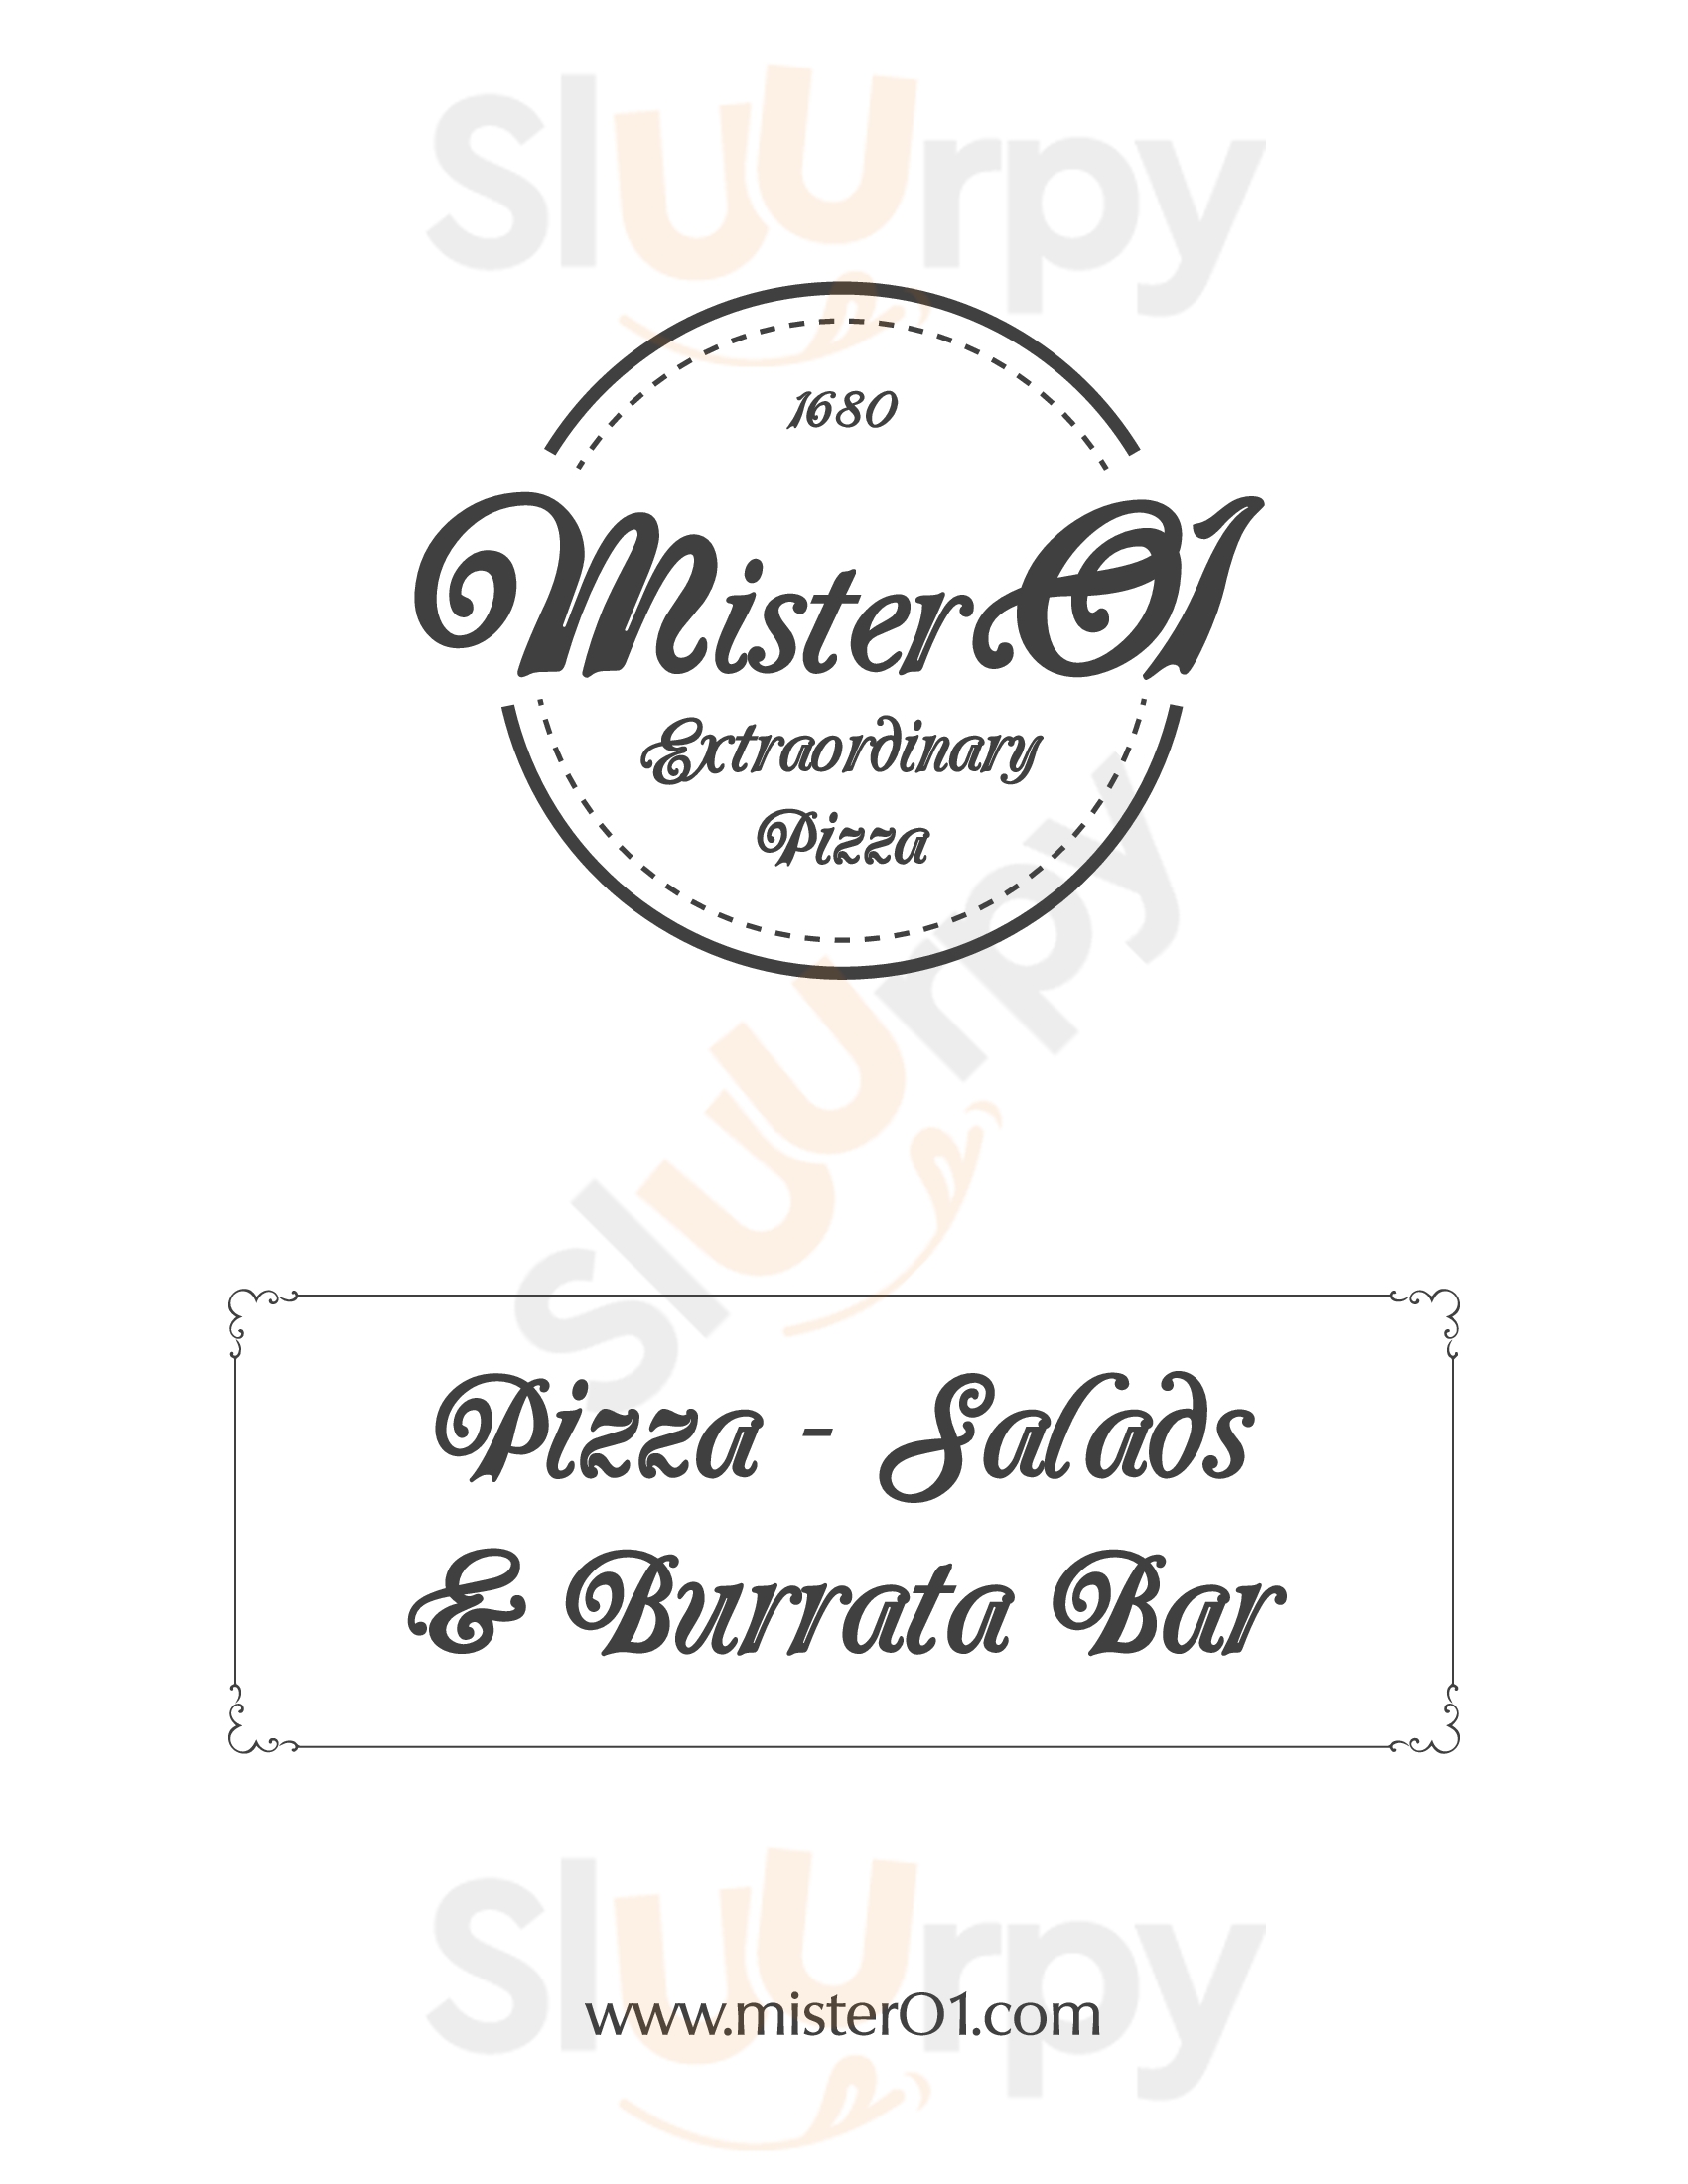 Mister O1 Extraordinary Pizza - Fort Lauderdale Fort Lauderdale Menu - 1